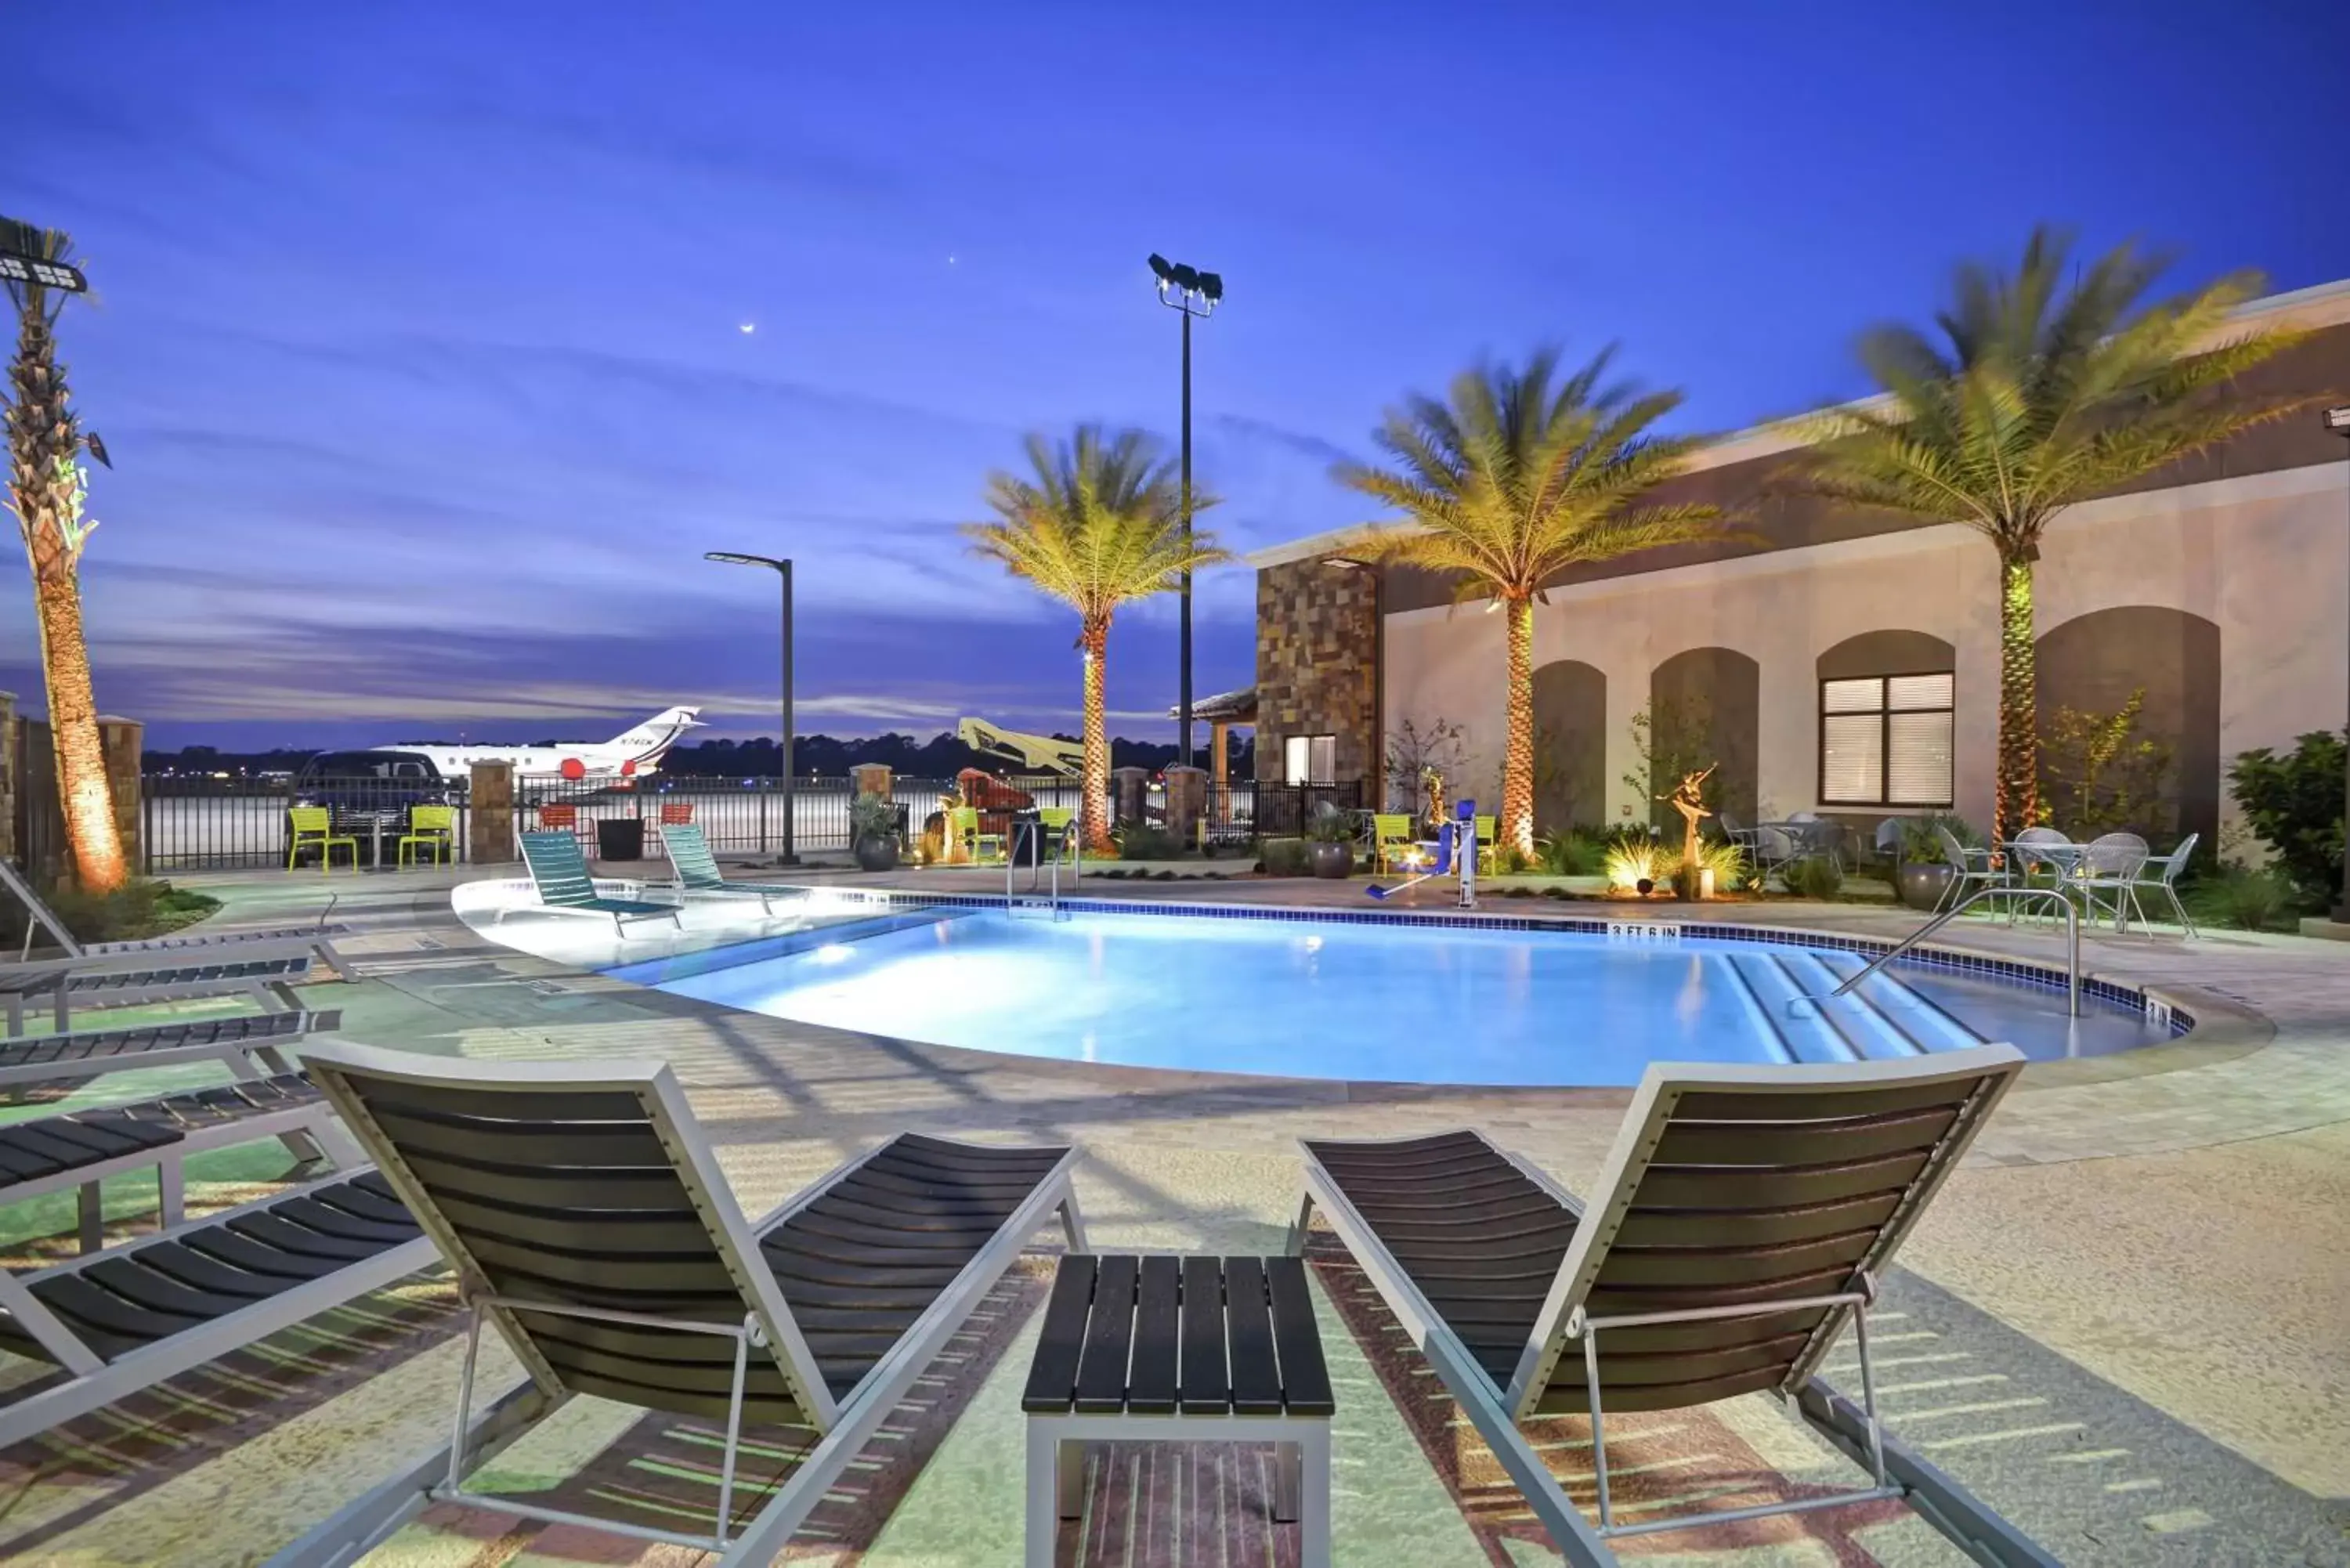 Property building, Swimming Pool in Home2 Suites By Hilton St. Simons Island